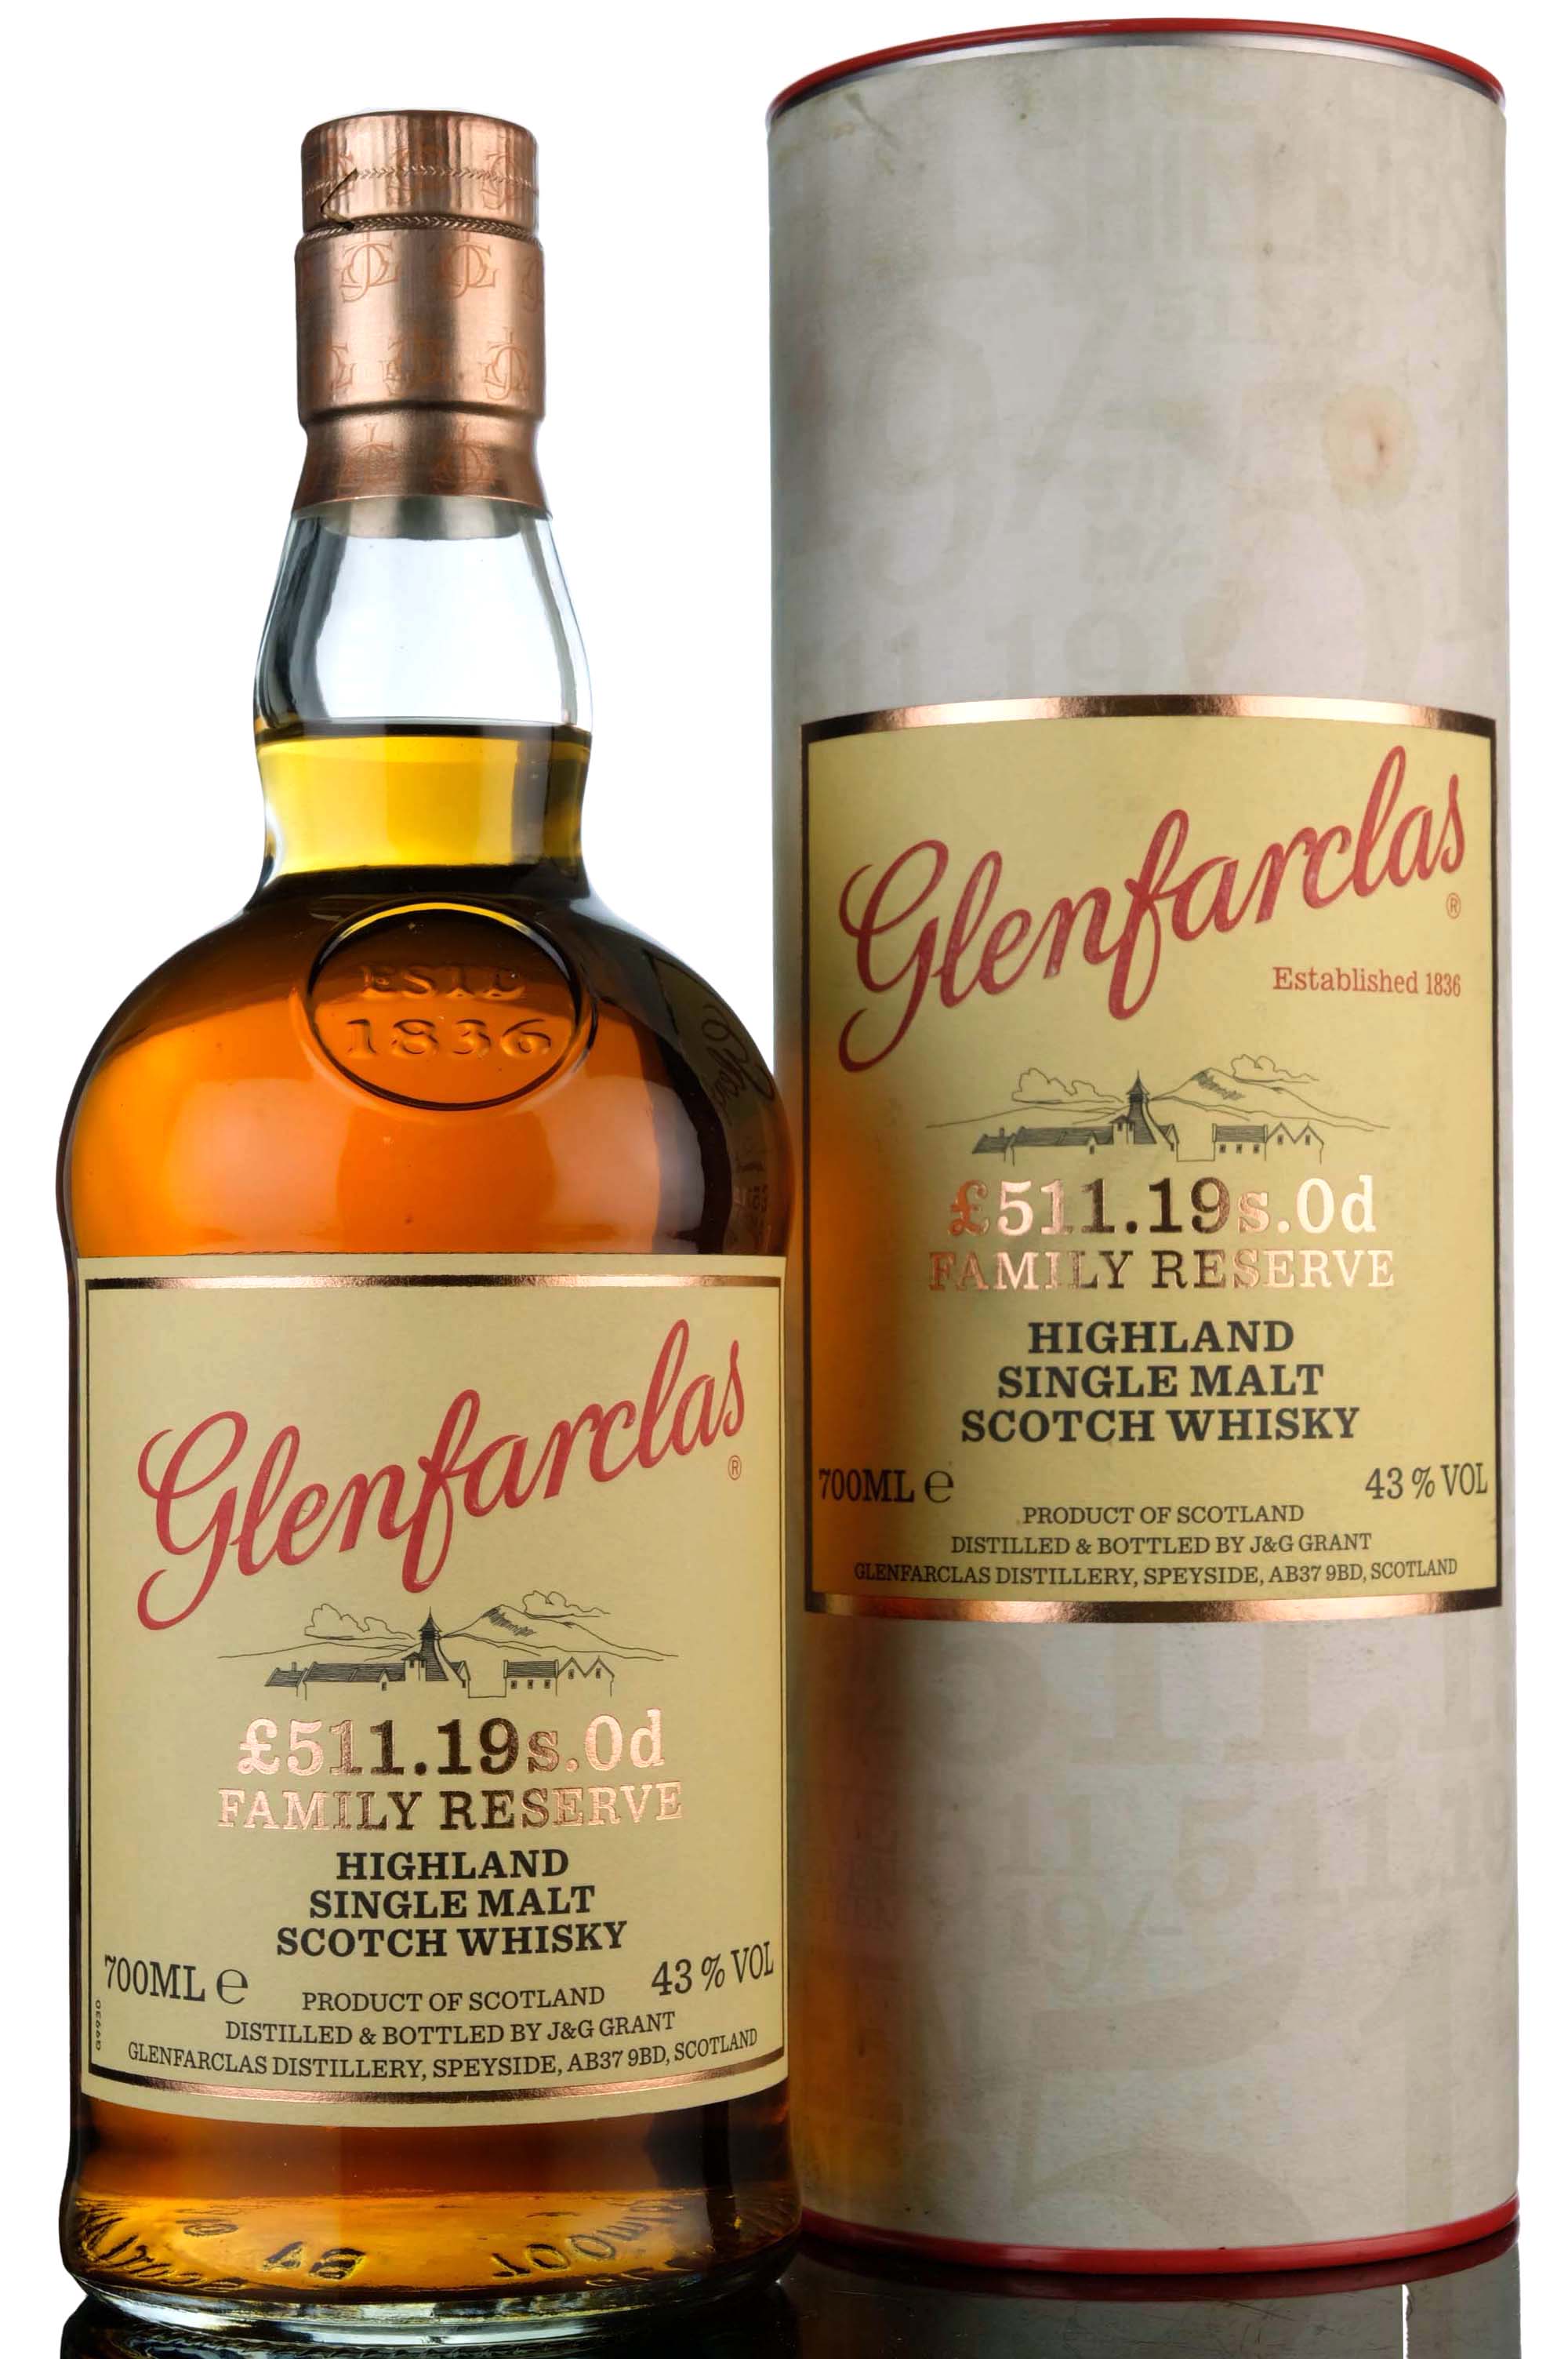 Glenfarclas £511.19s.Od - Family Reserve - 150 Years Of Ownership - 2015 Release